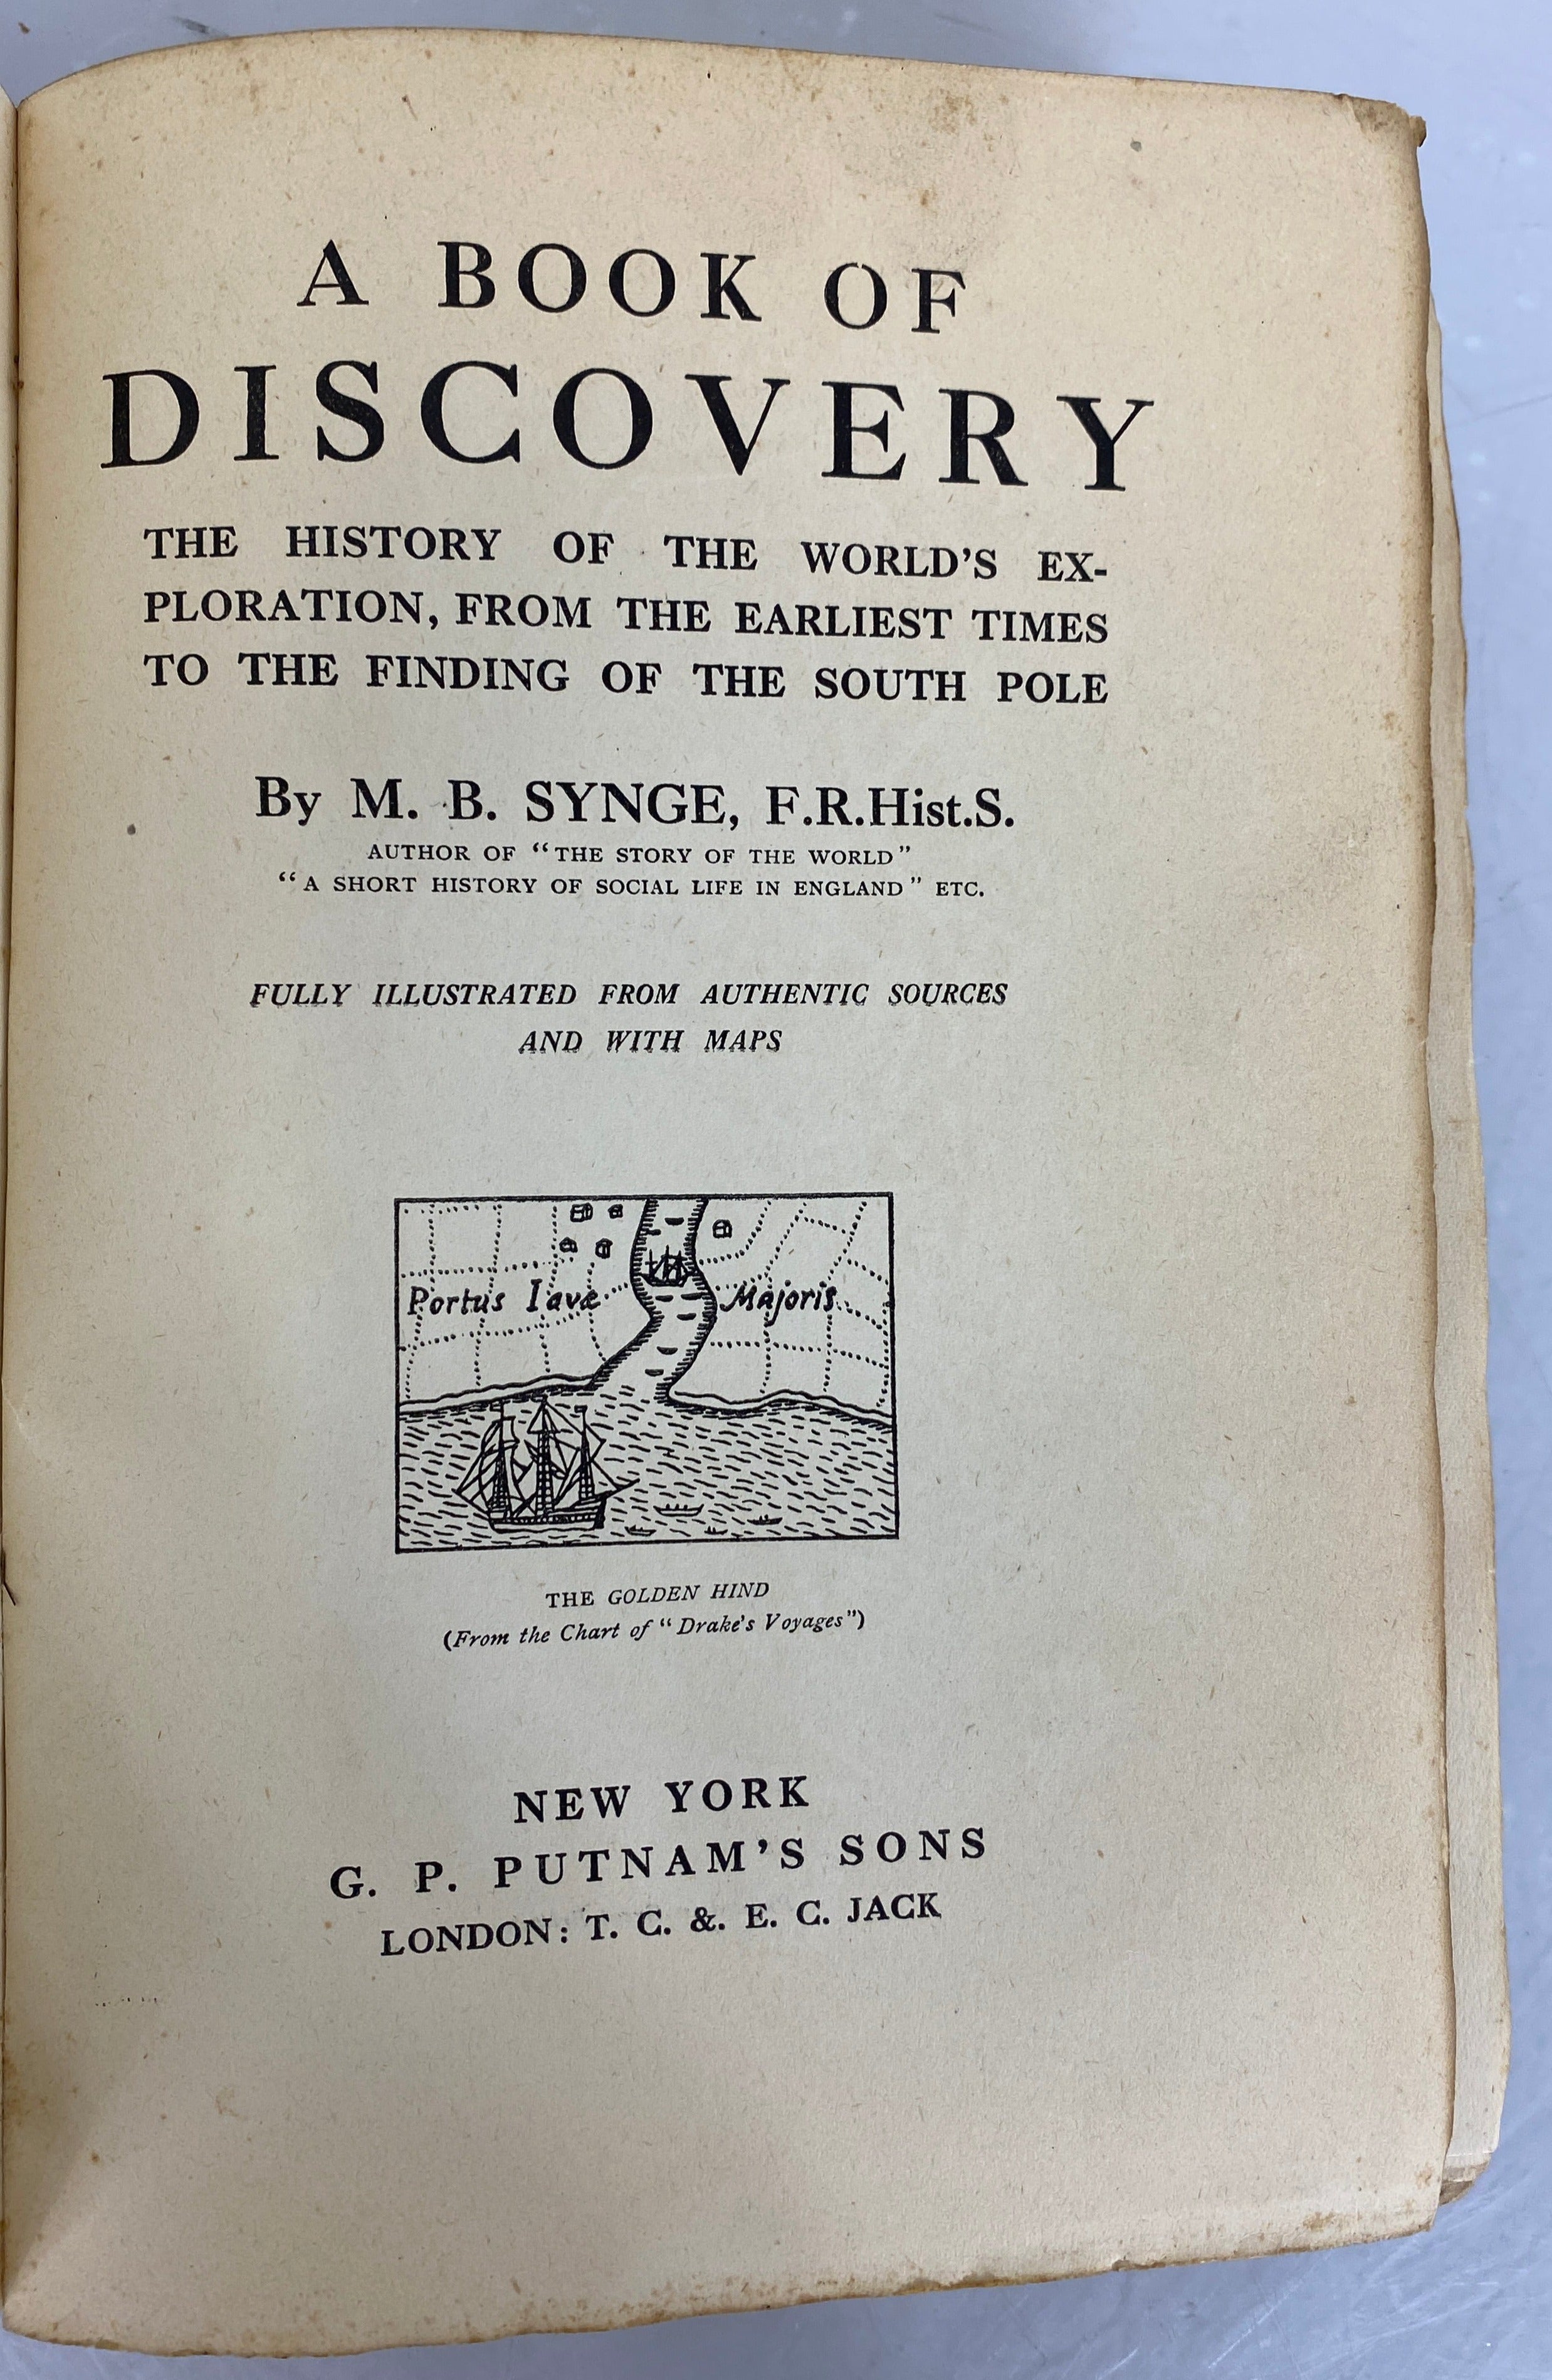 A Book of Discovery by M.B. Synge (c1915) Antique HC First American Edition